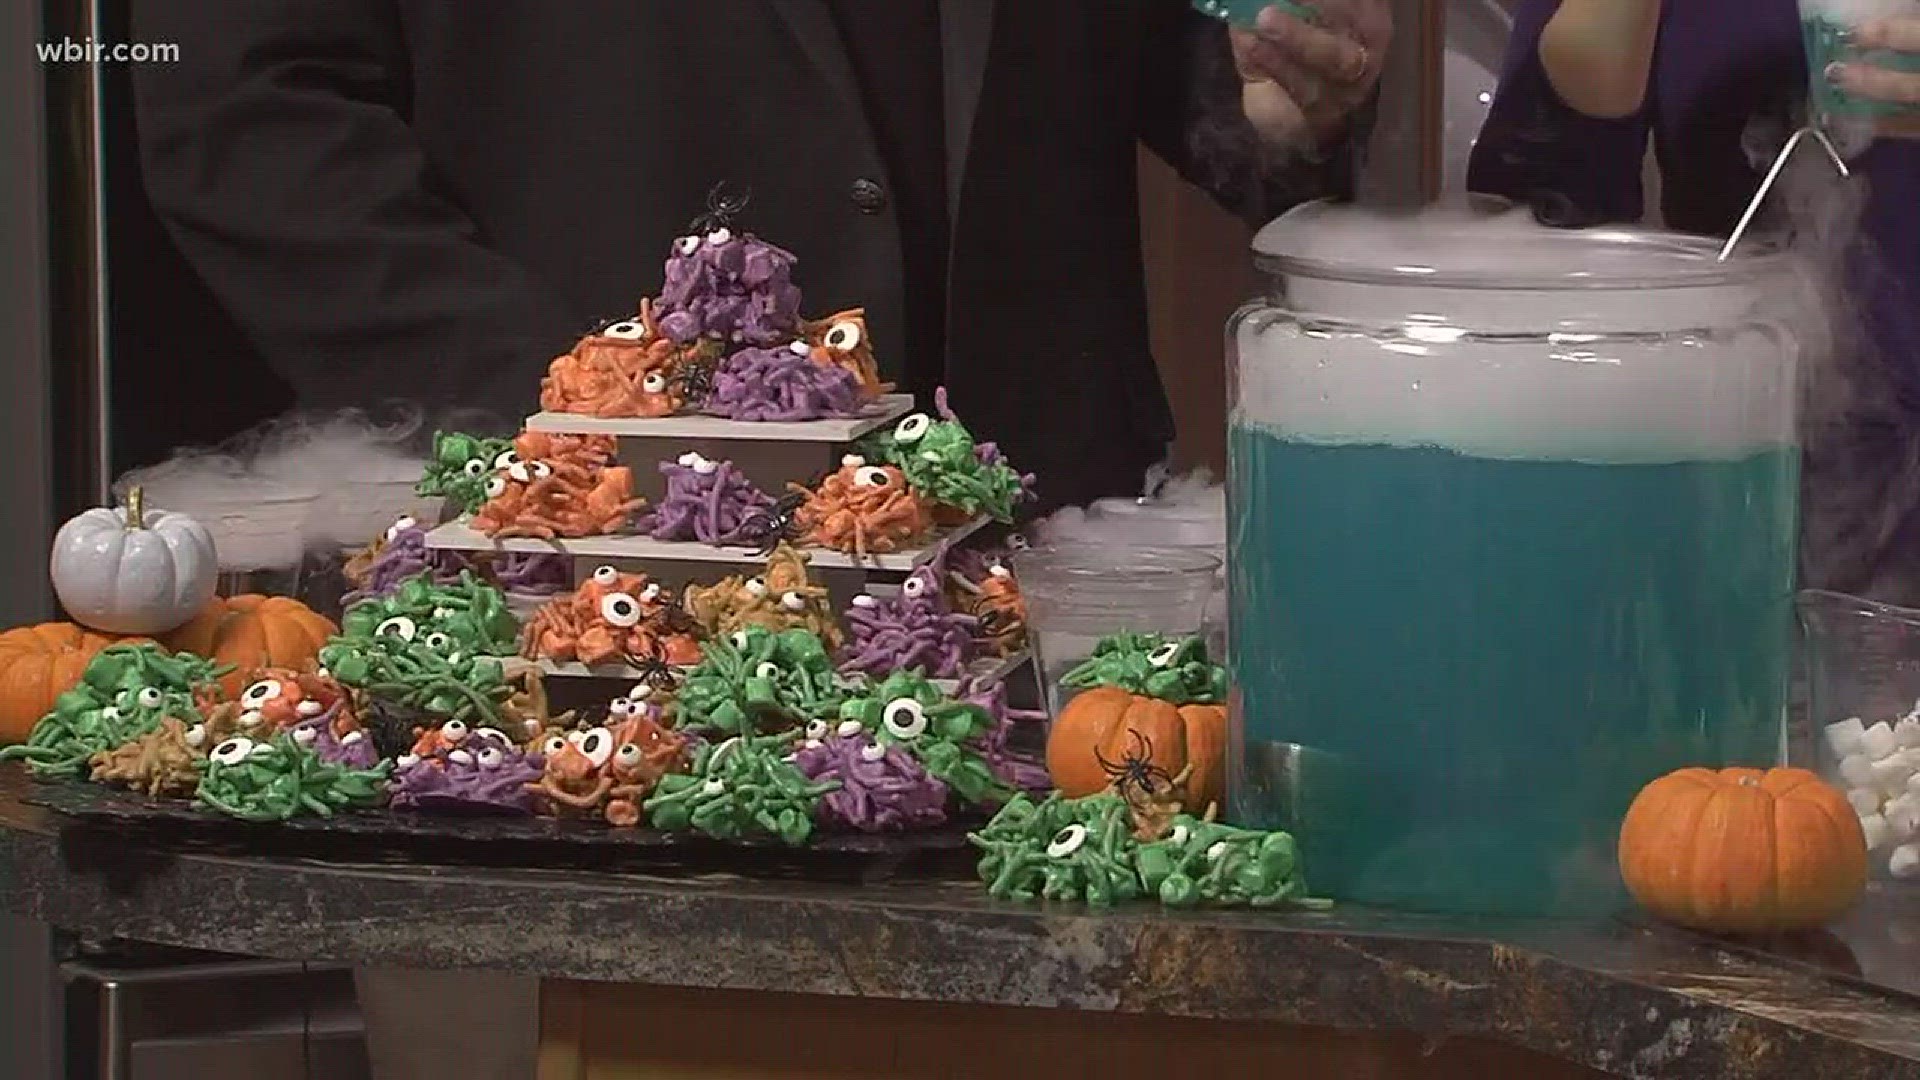 Shona and Lee of Faith Baked Cakes prepare haunted haystacks.
For more information on Shona's business visit faithbakedcakes.com or call 423-754-6427
October 30, 2017-4pm